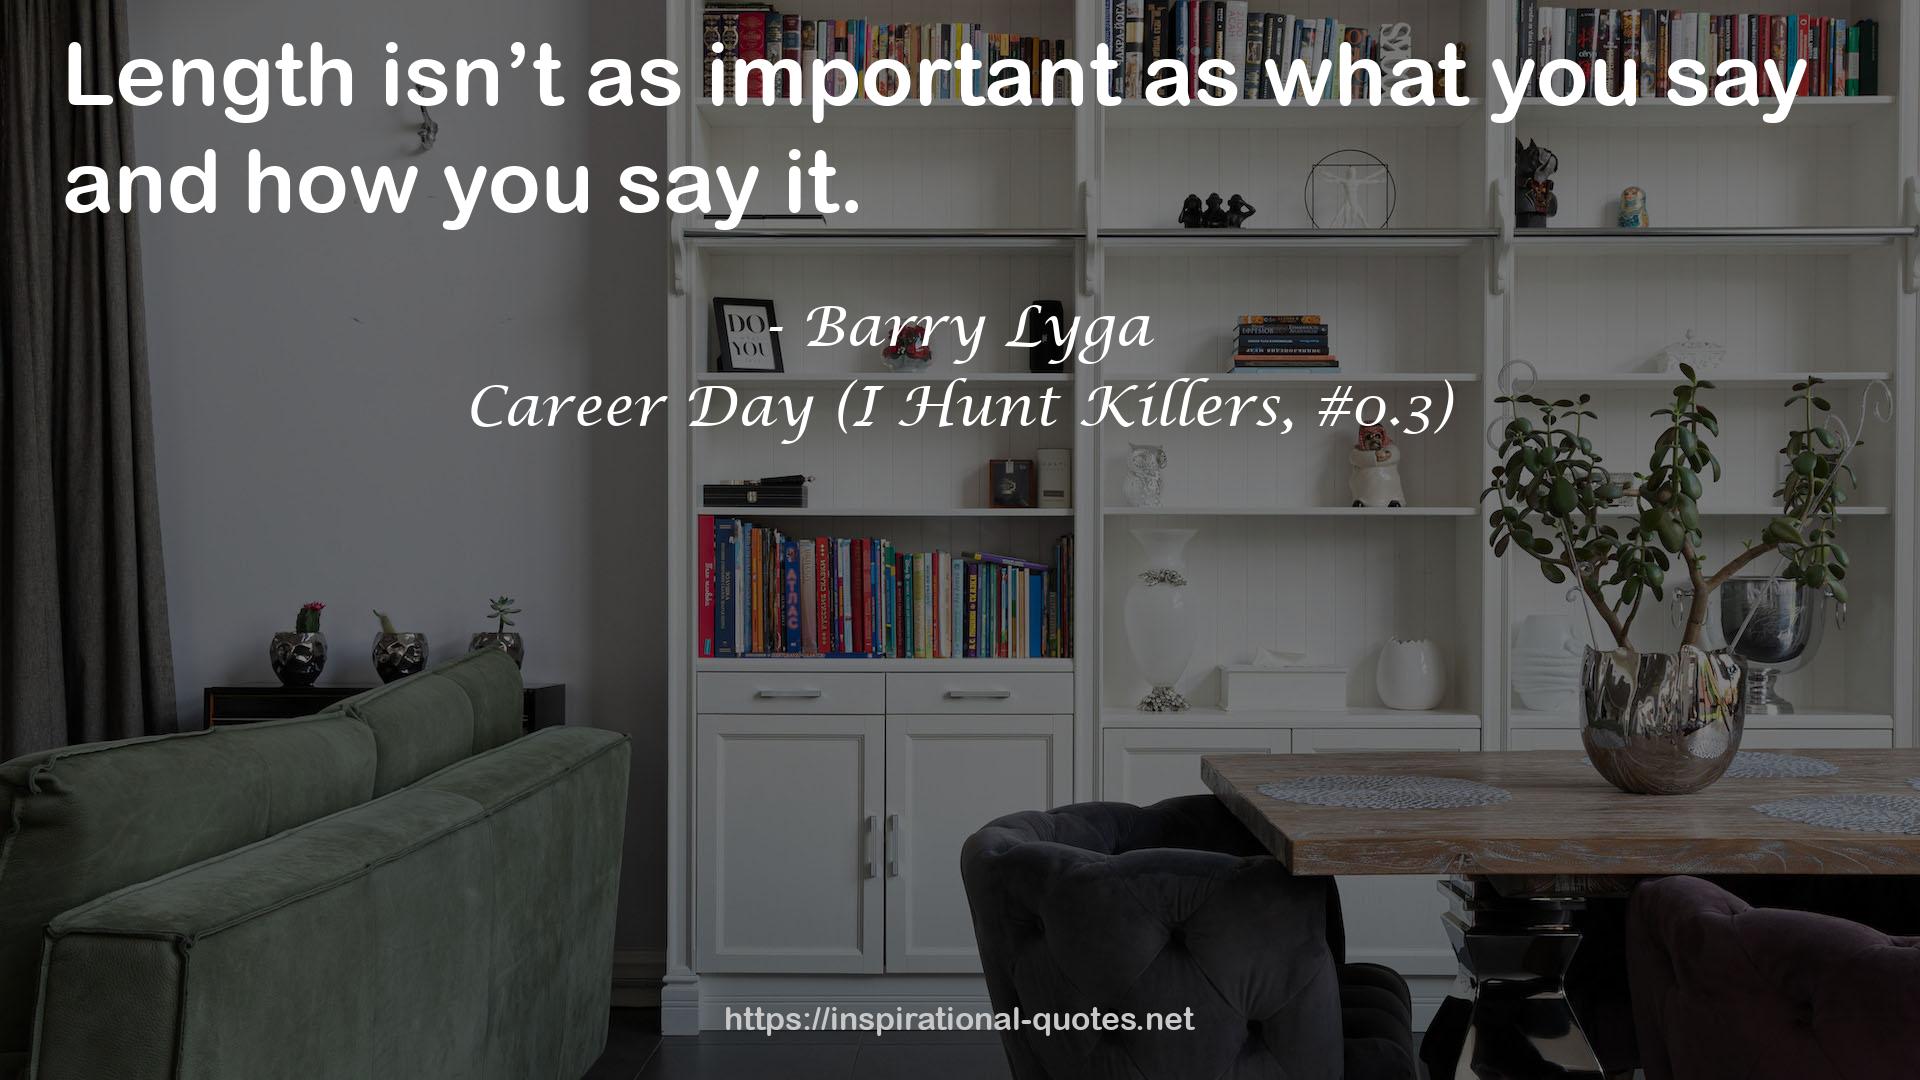 Career Day (I Hunt Killers, #0.3) QUOTES